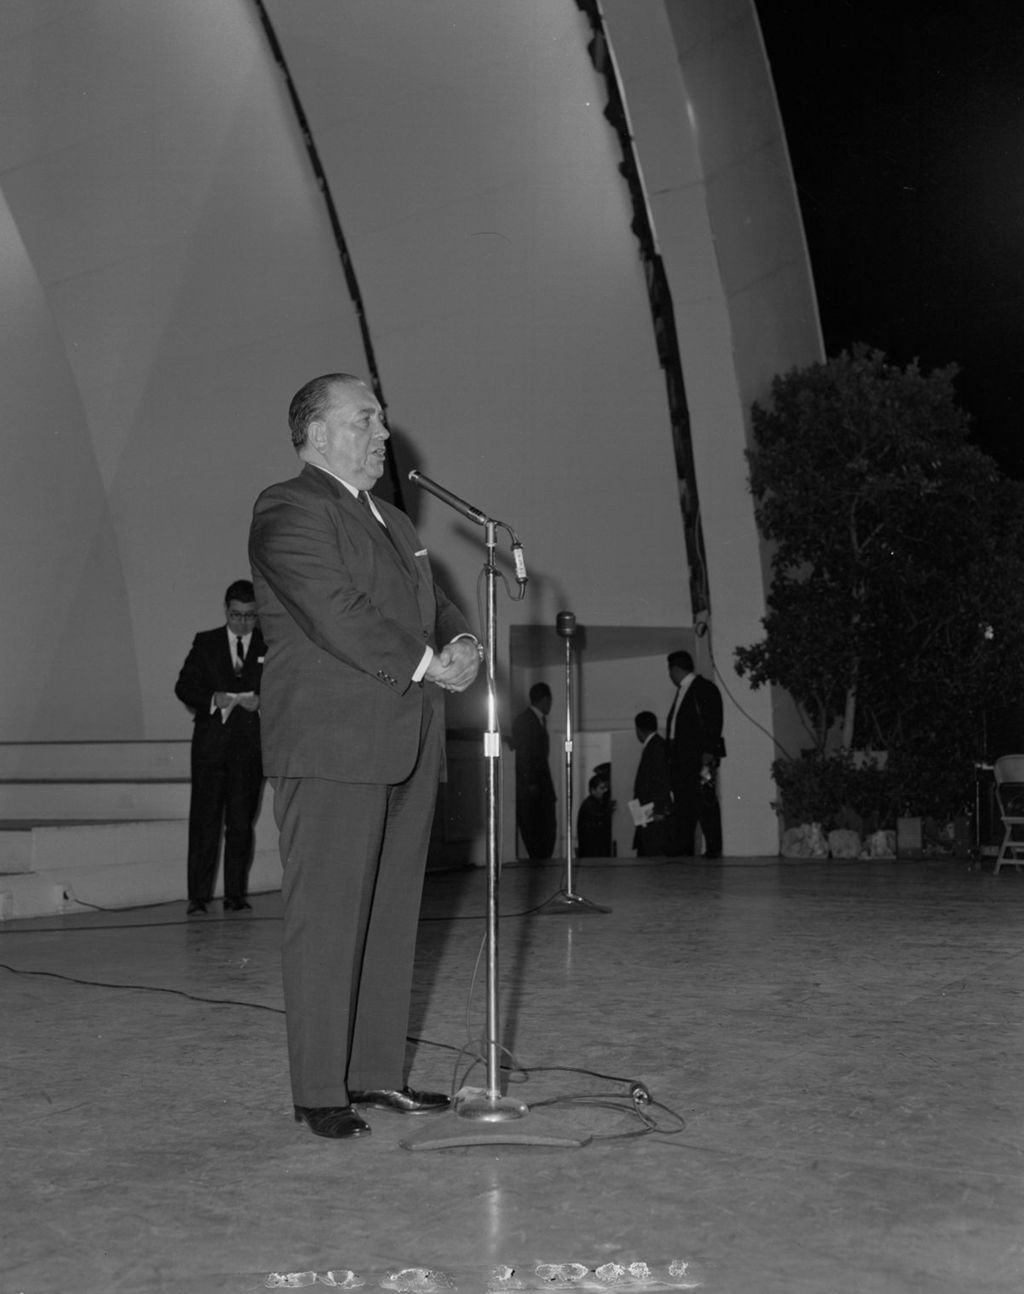 Miniature of Richard J. Daley at Mexican Independence celebration